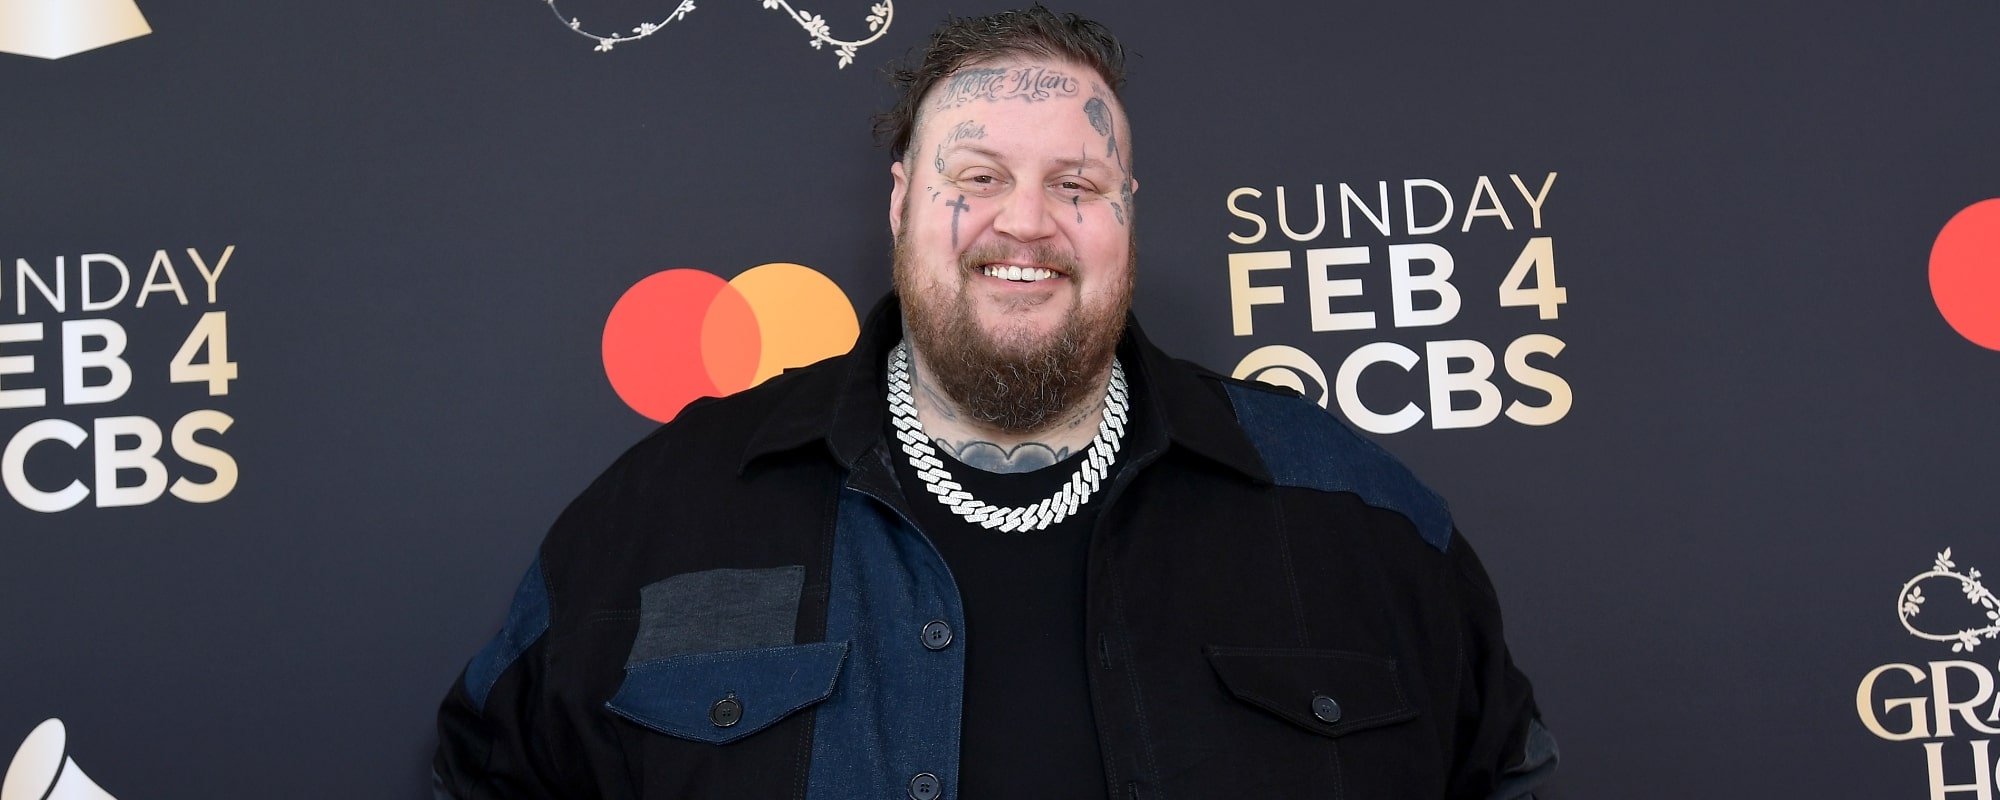 Jelly Roll to Host Opry NextStage Live from Texas Ahead of the ACM Awards